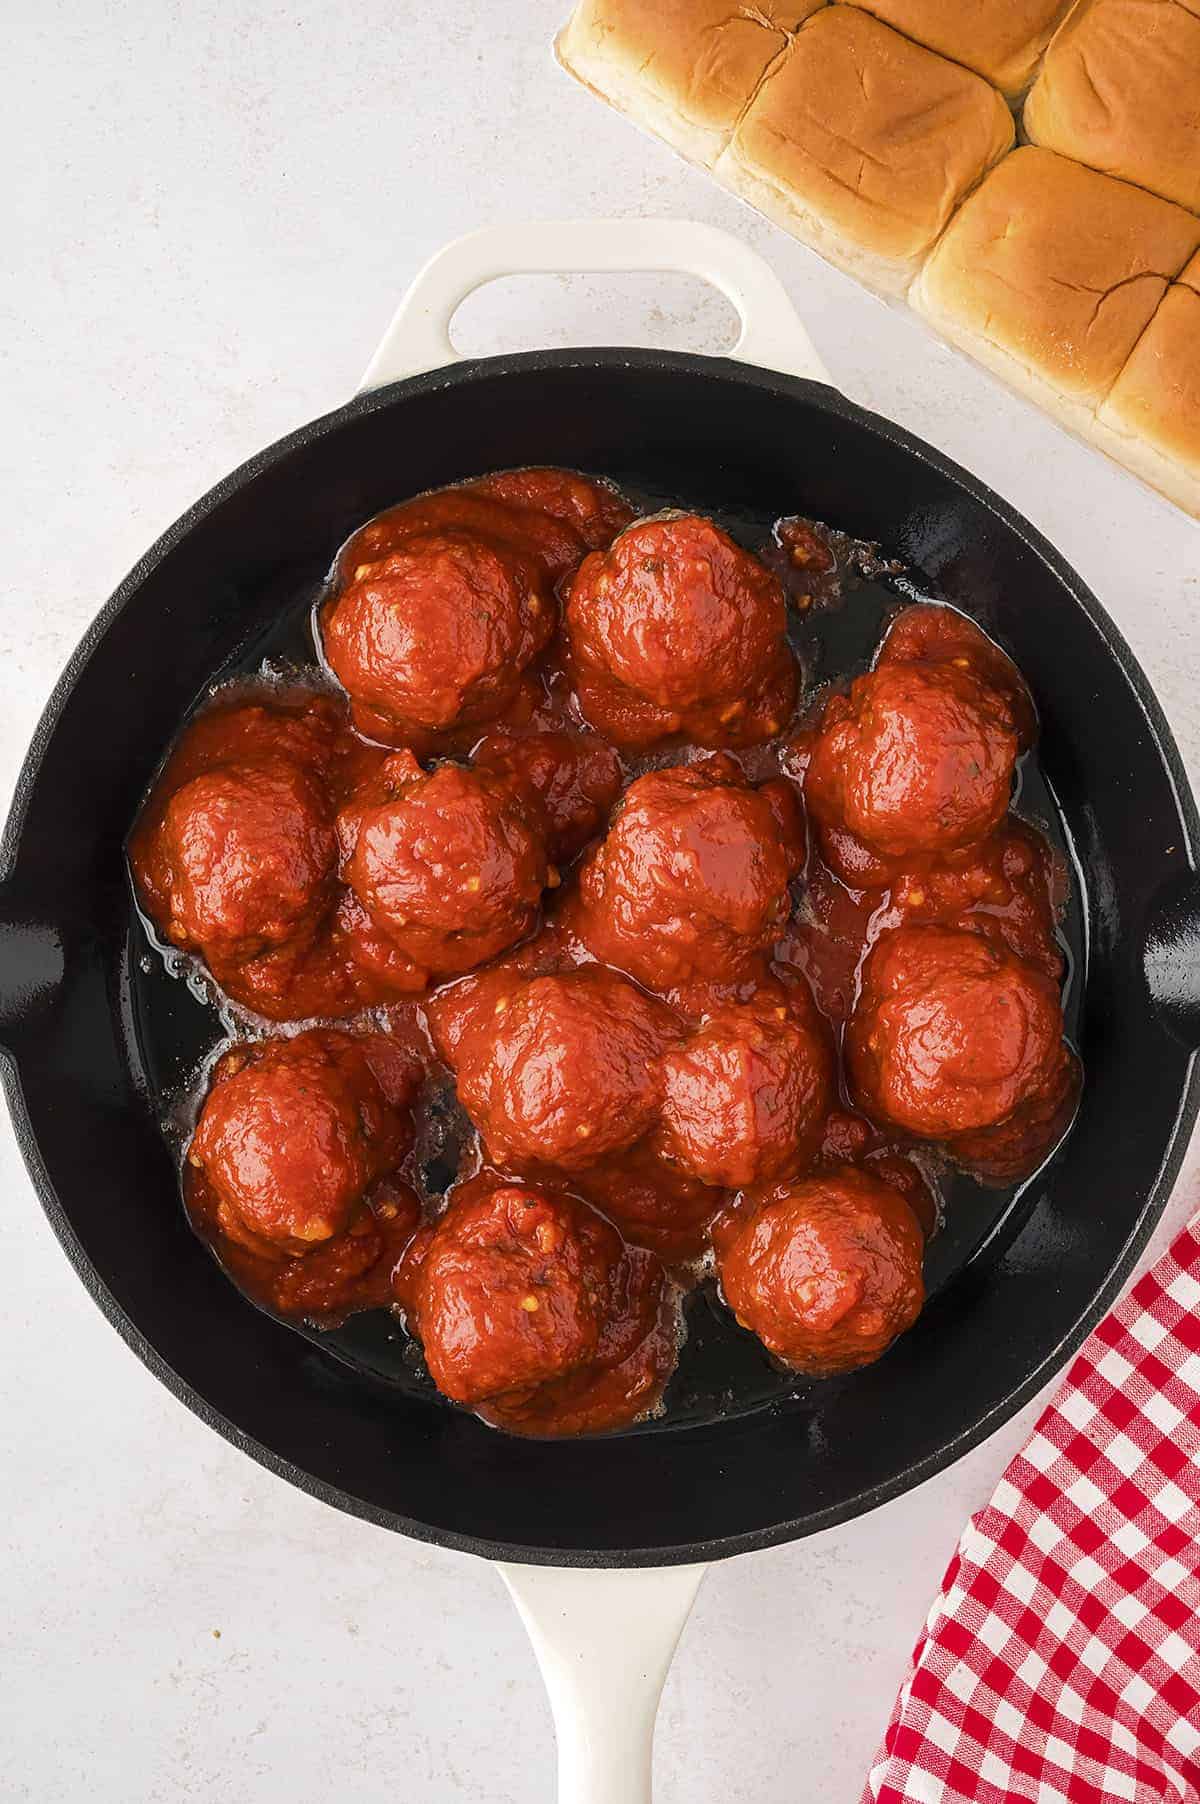 Meatballs covered in sauce in skillet.